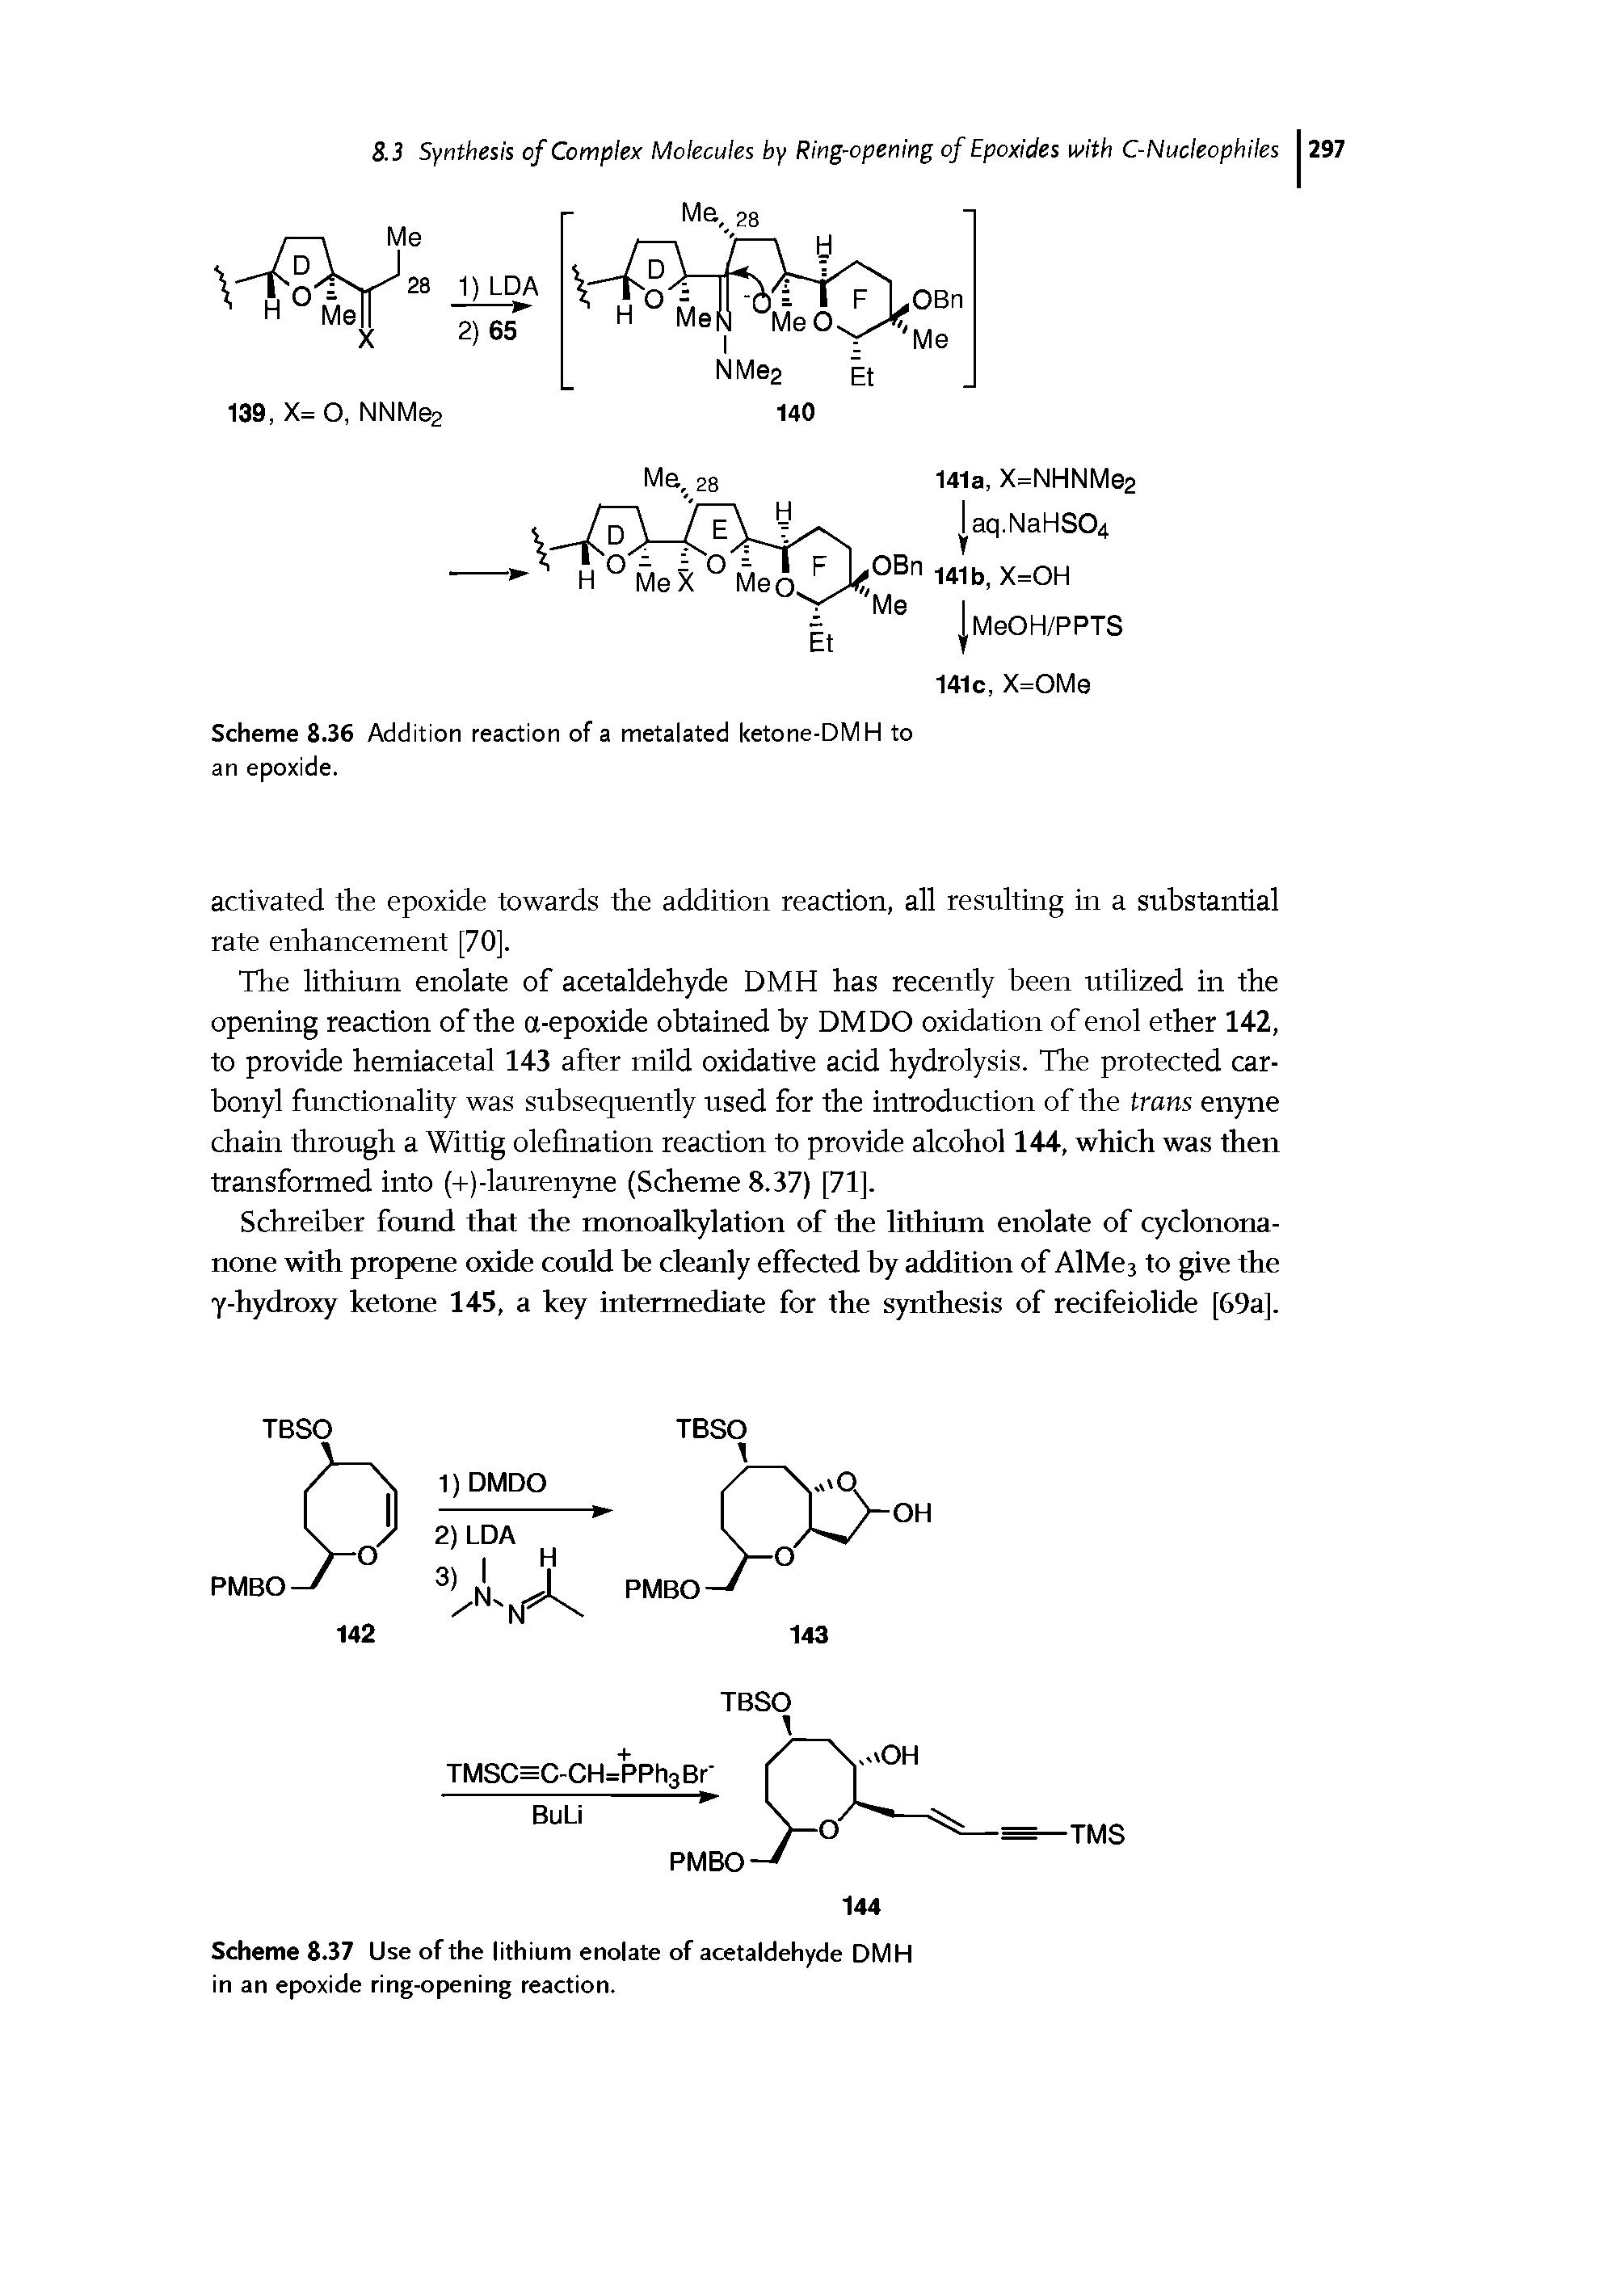 Scheme 8.37 Use of the lithium enolate of acetaldehyde DMH in an epoxide ring-opening reaction.